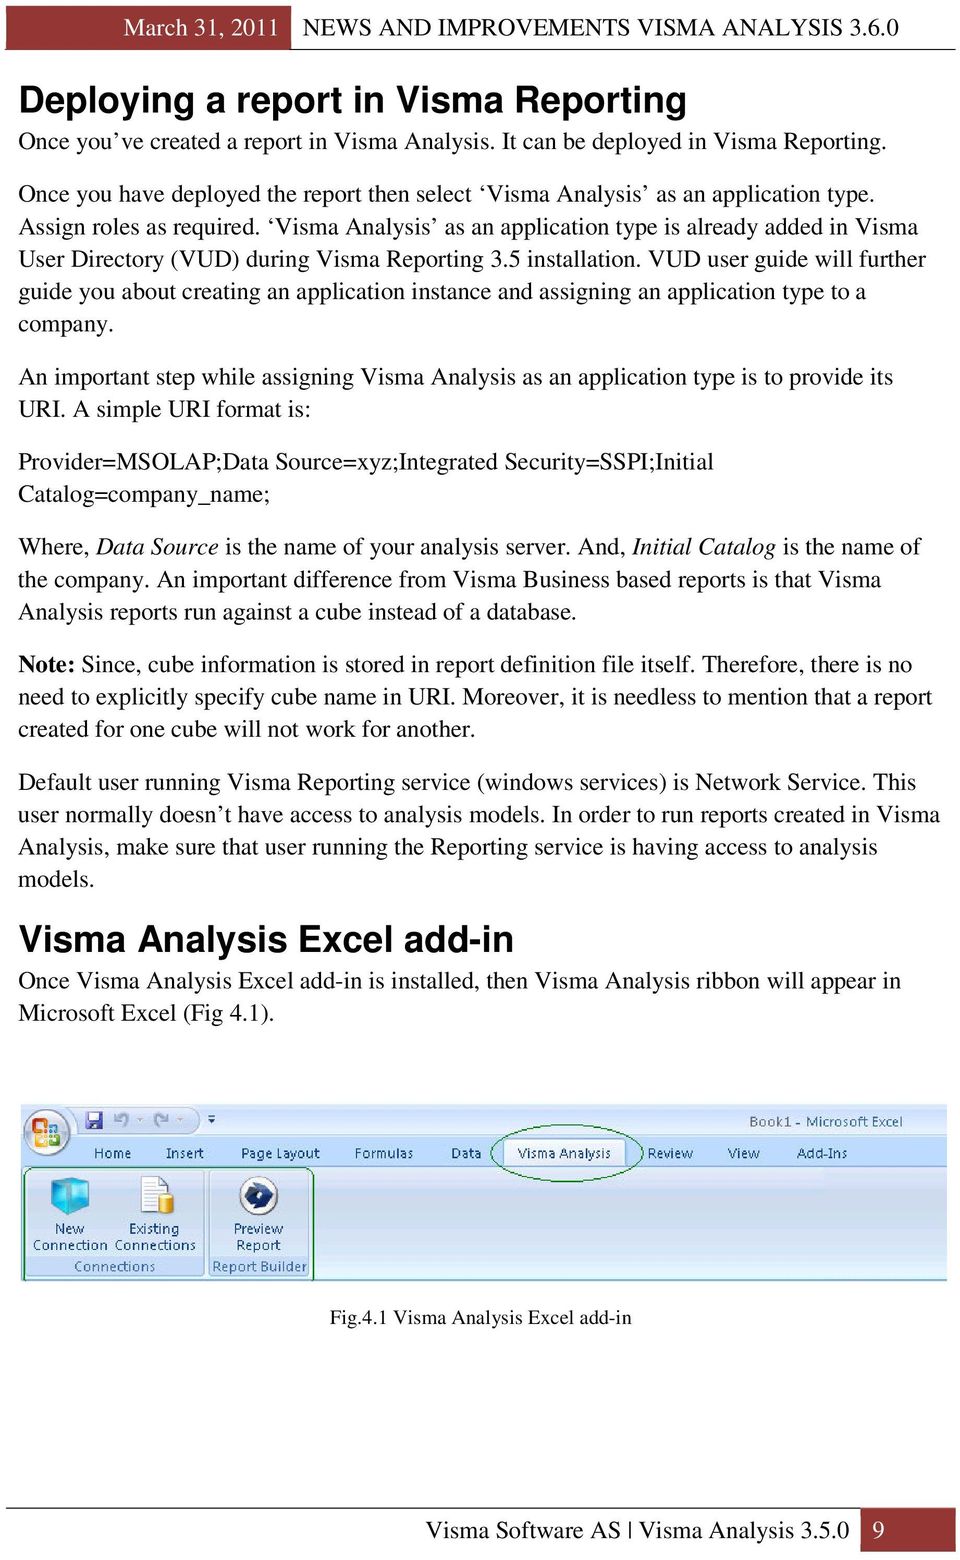 Visma Analysis as an application type is already added in Visma User Directory (VUD) during Visma Reporting 3.5 installation.